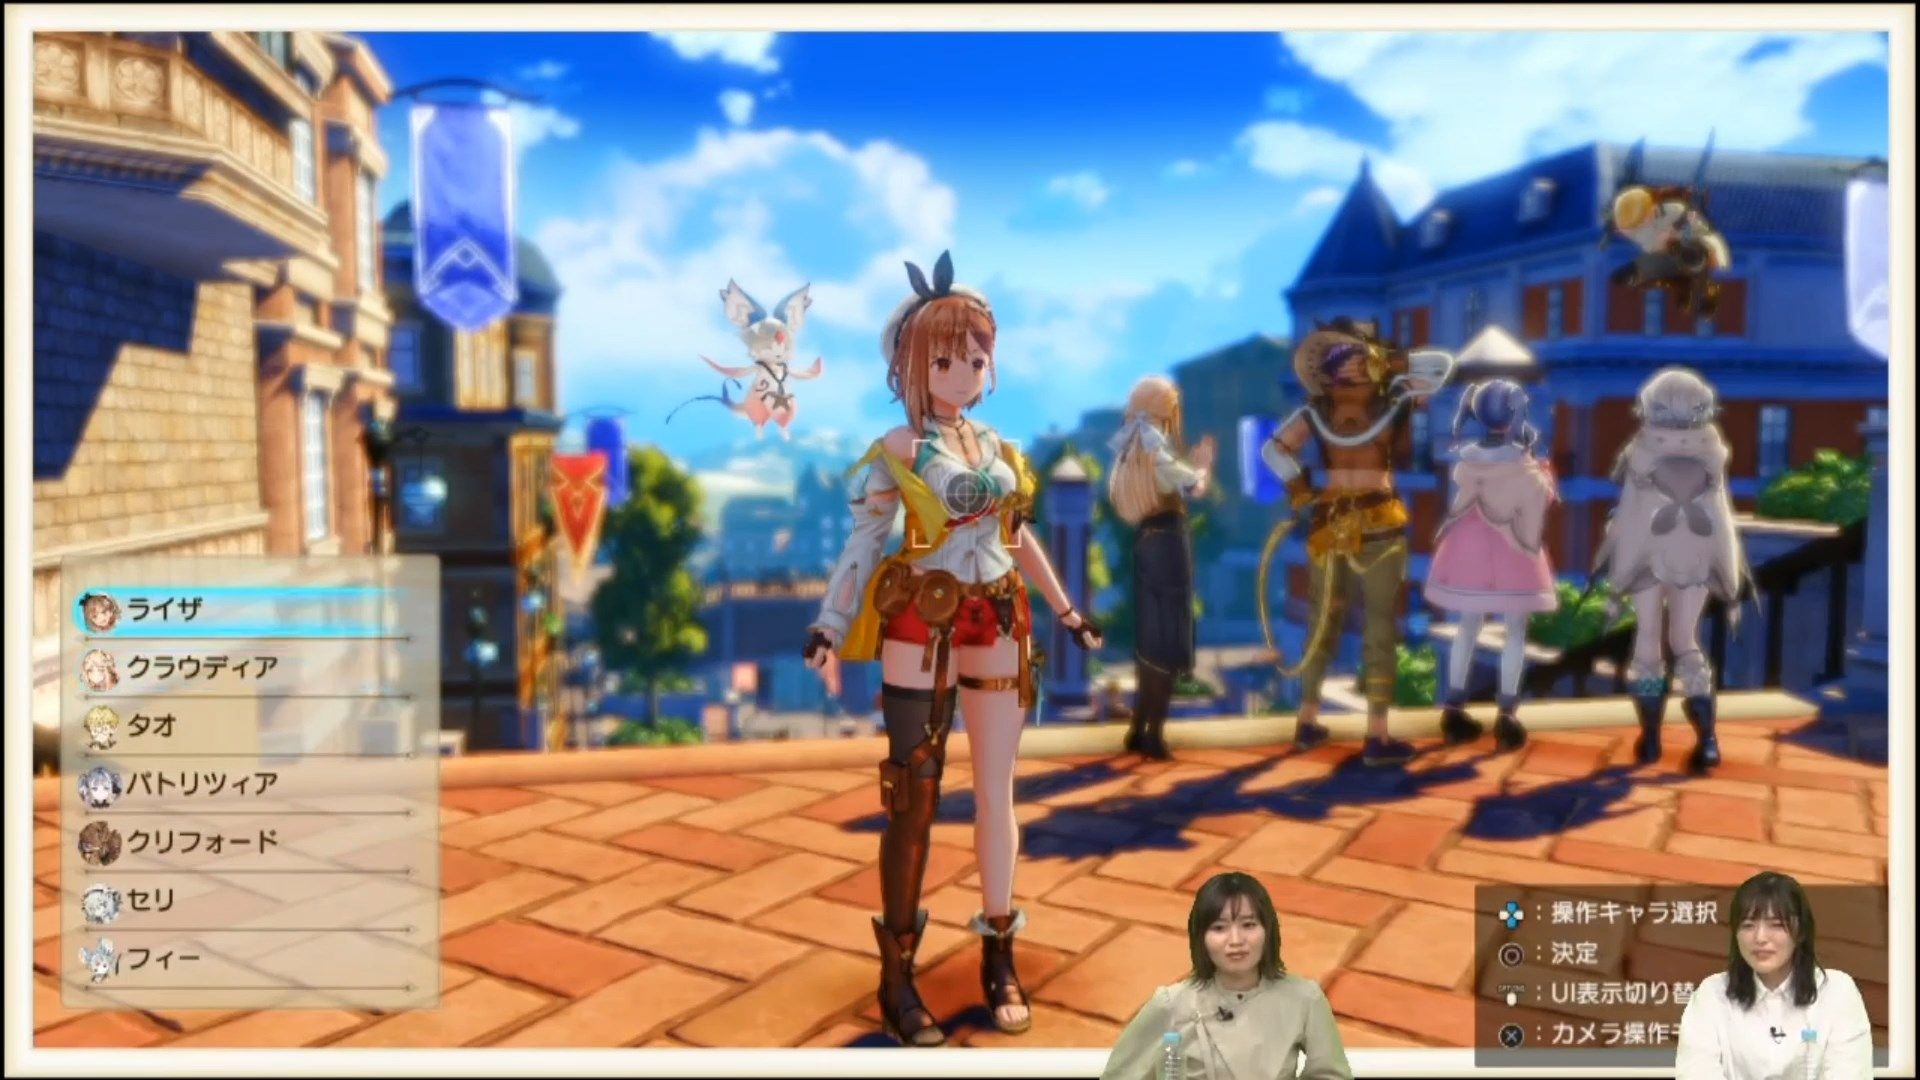 Atelier Ryza 2 gameplay photo mode story feature